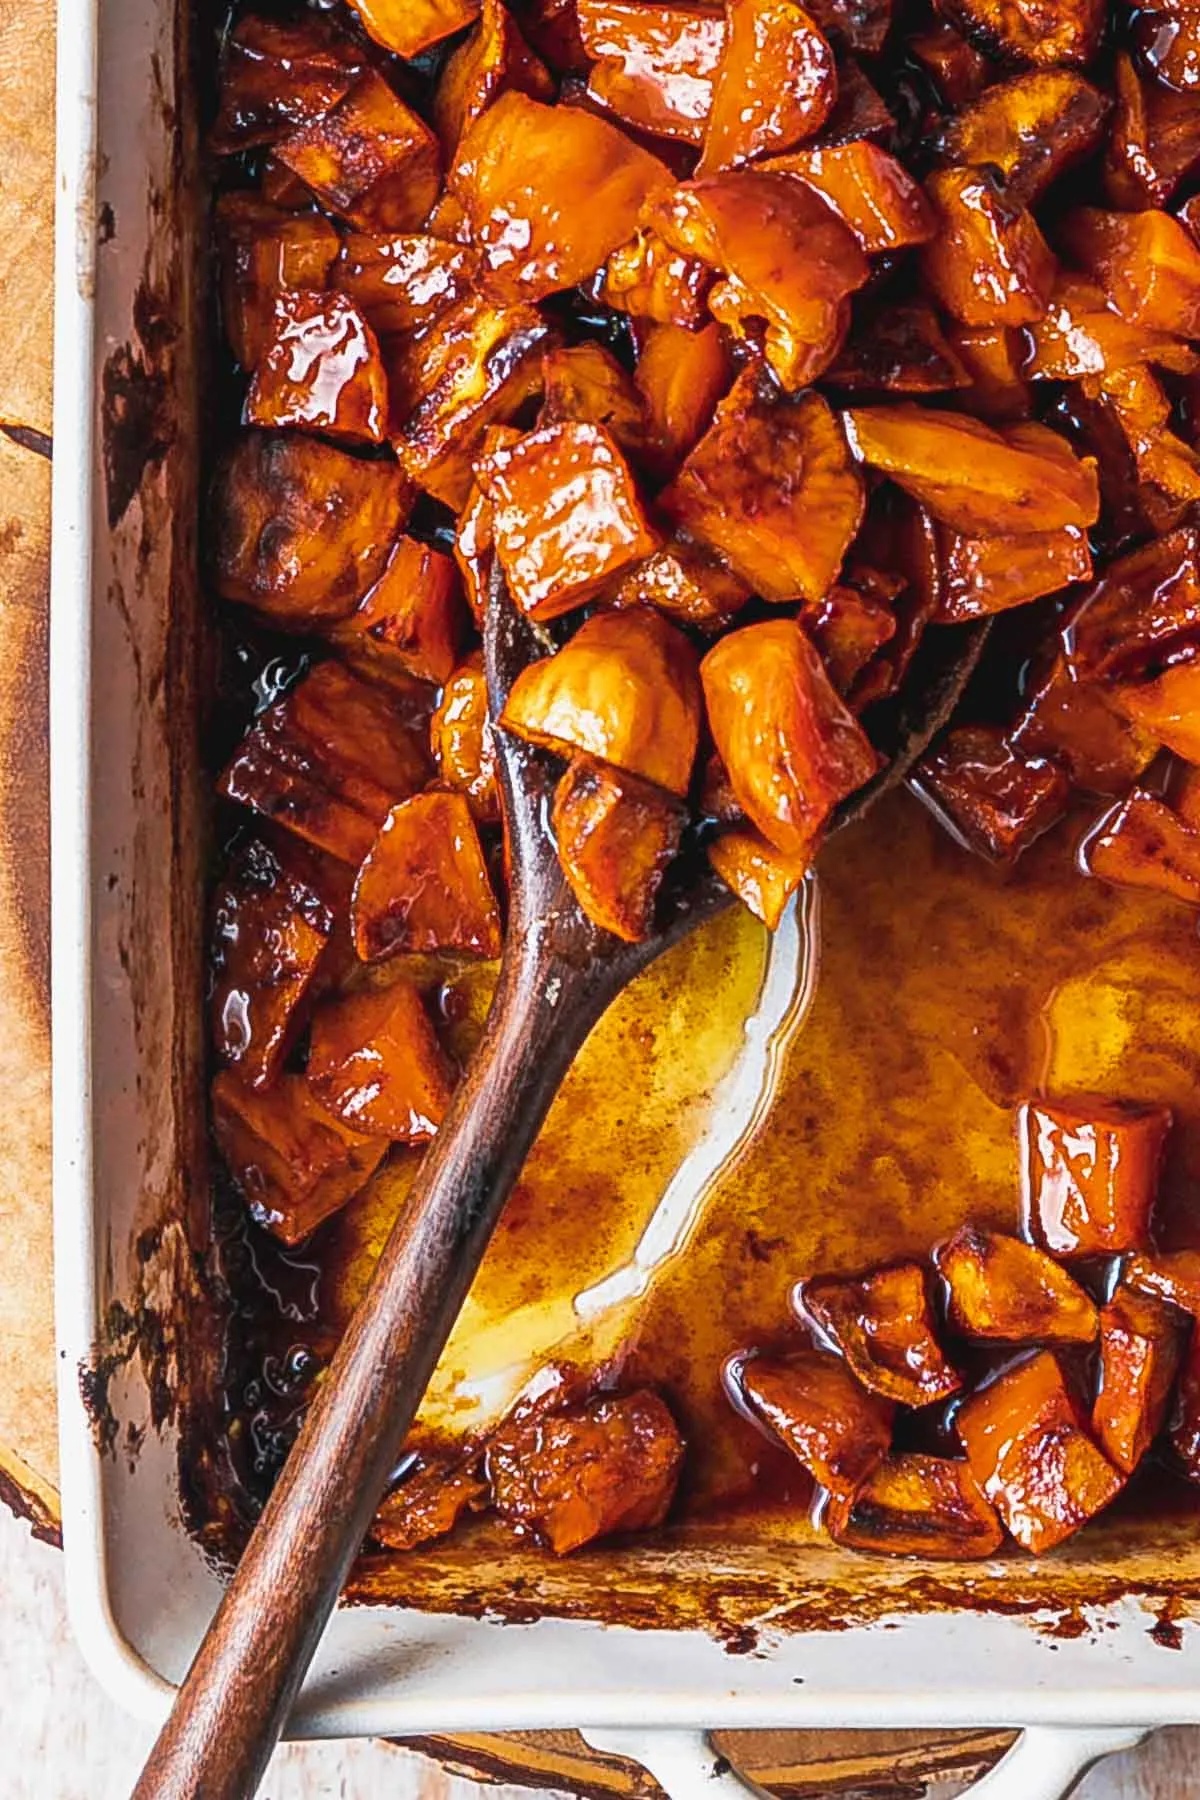 Southern baked candied yams